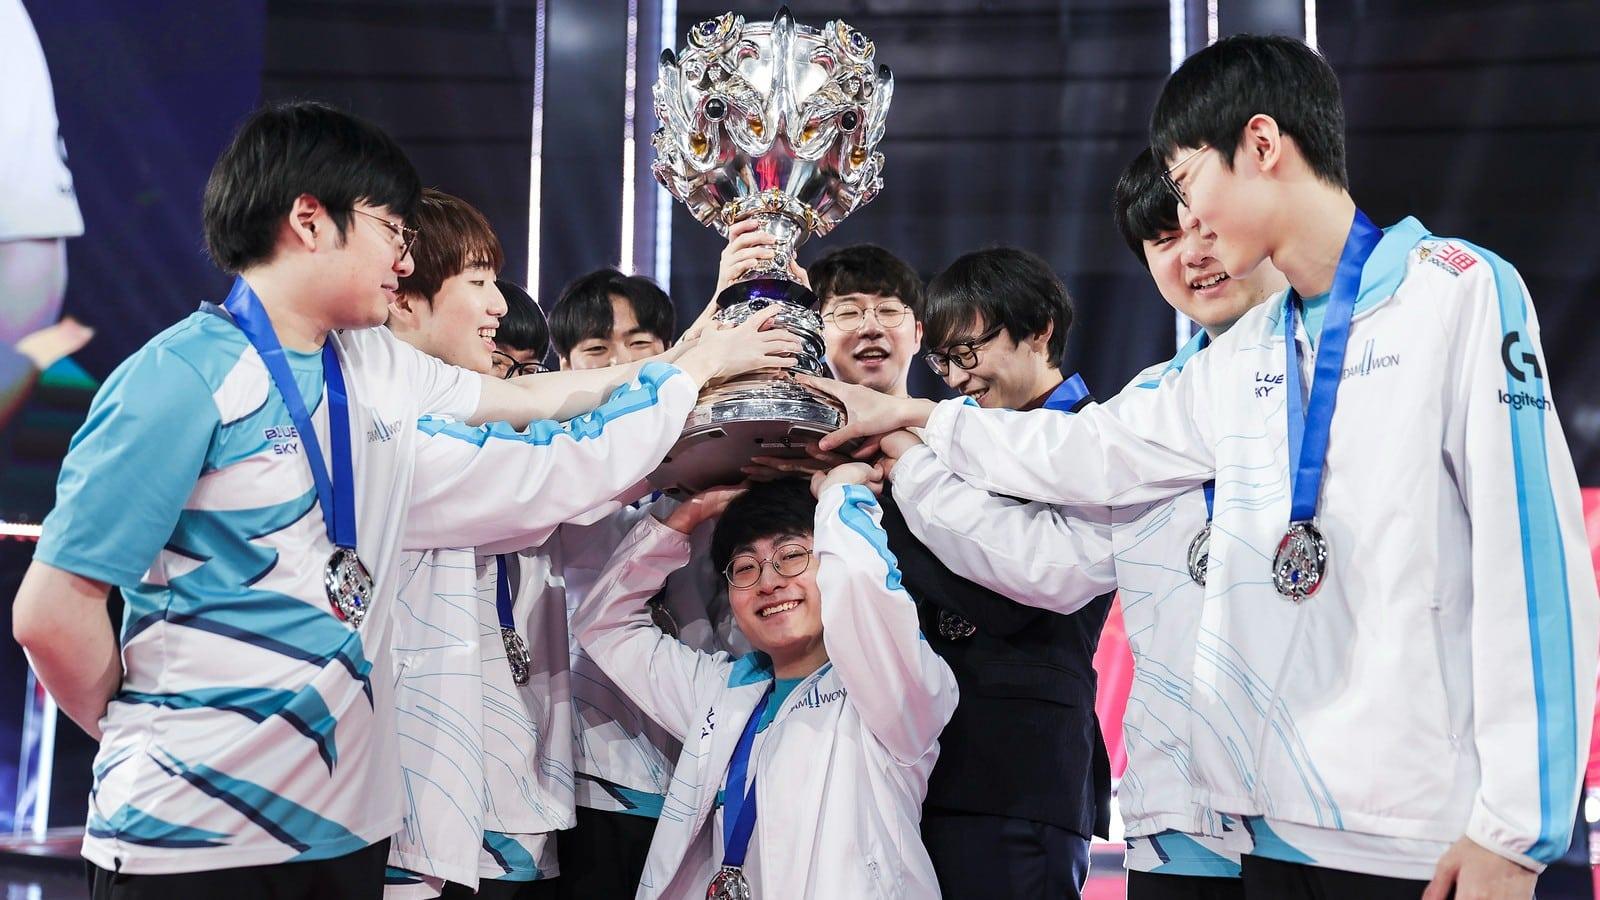 DWG lift the trophy at Worlds 2020